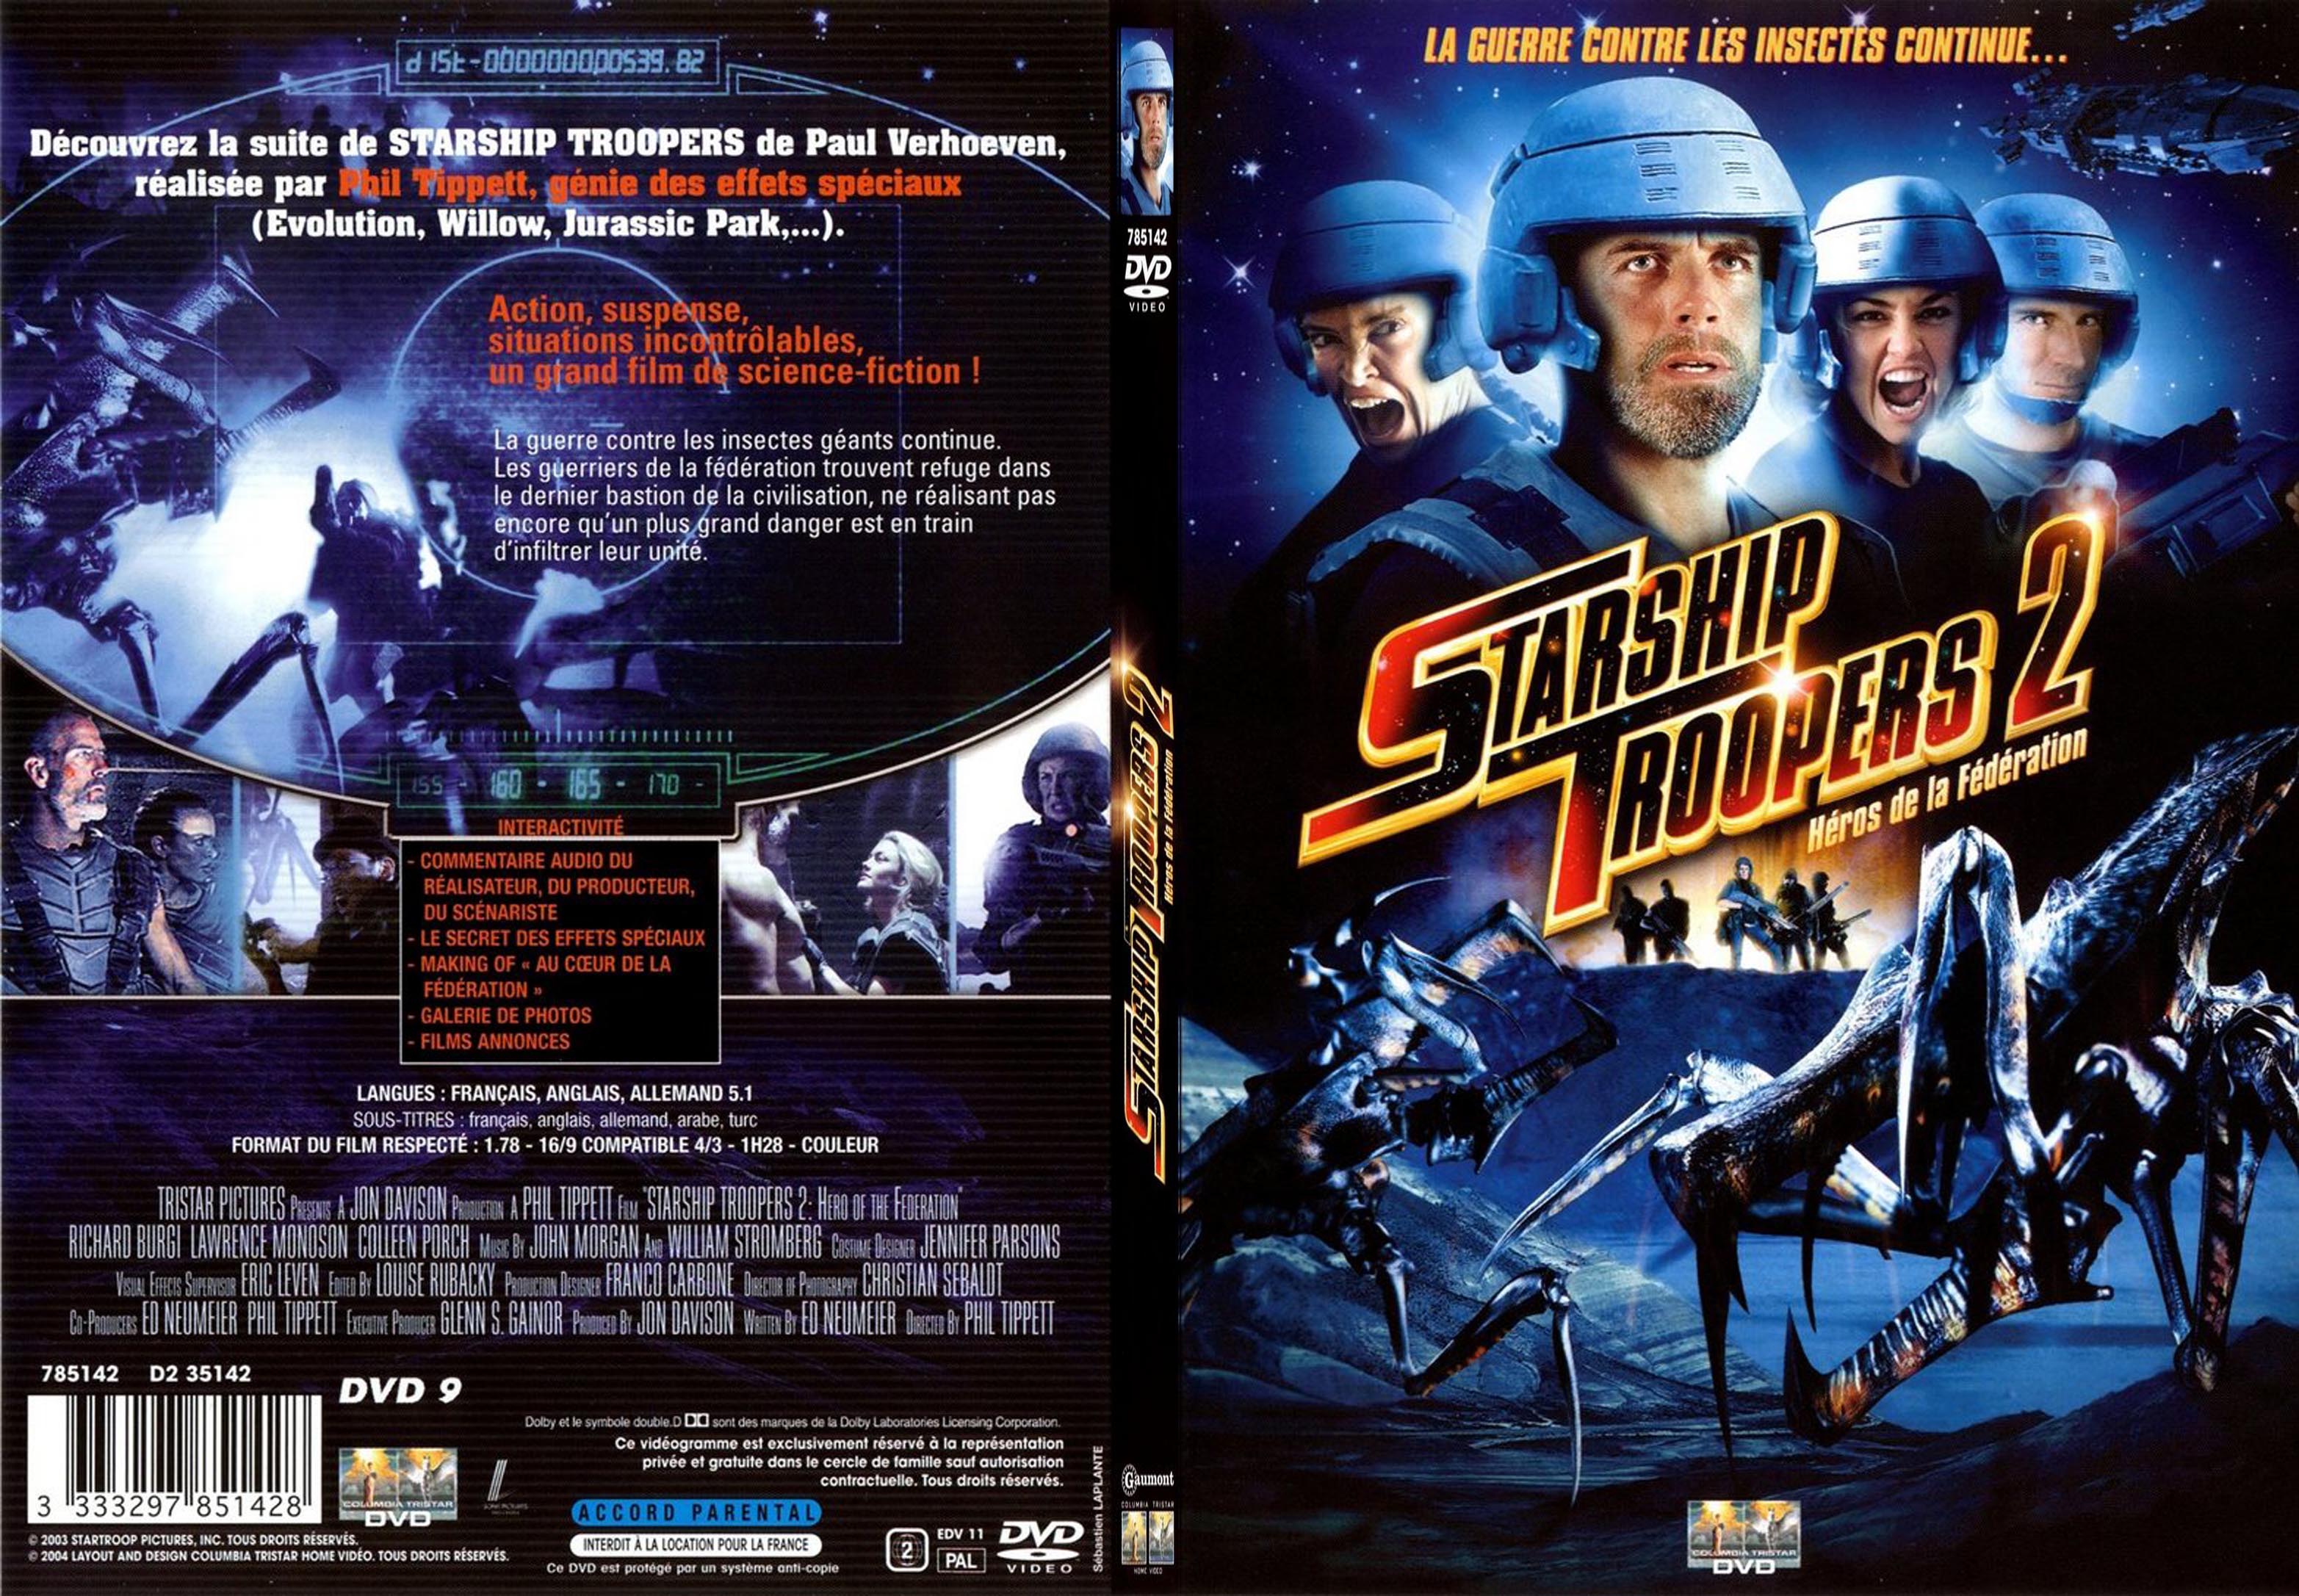 Jaquette DVD Starship troopers 2 - SLIM